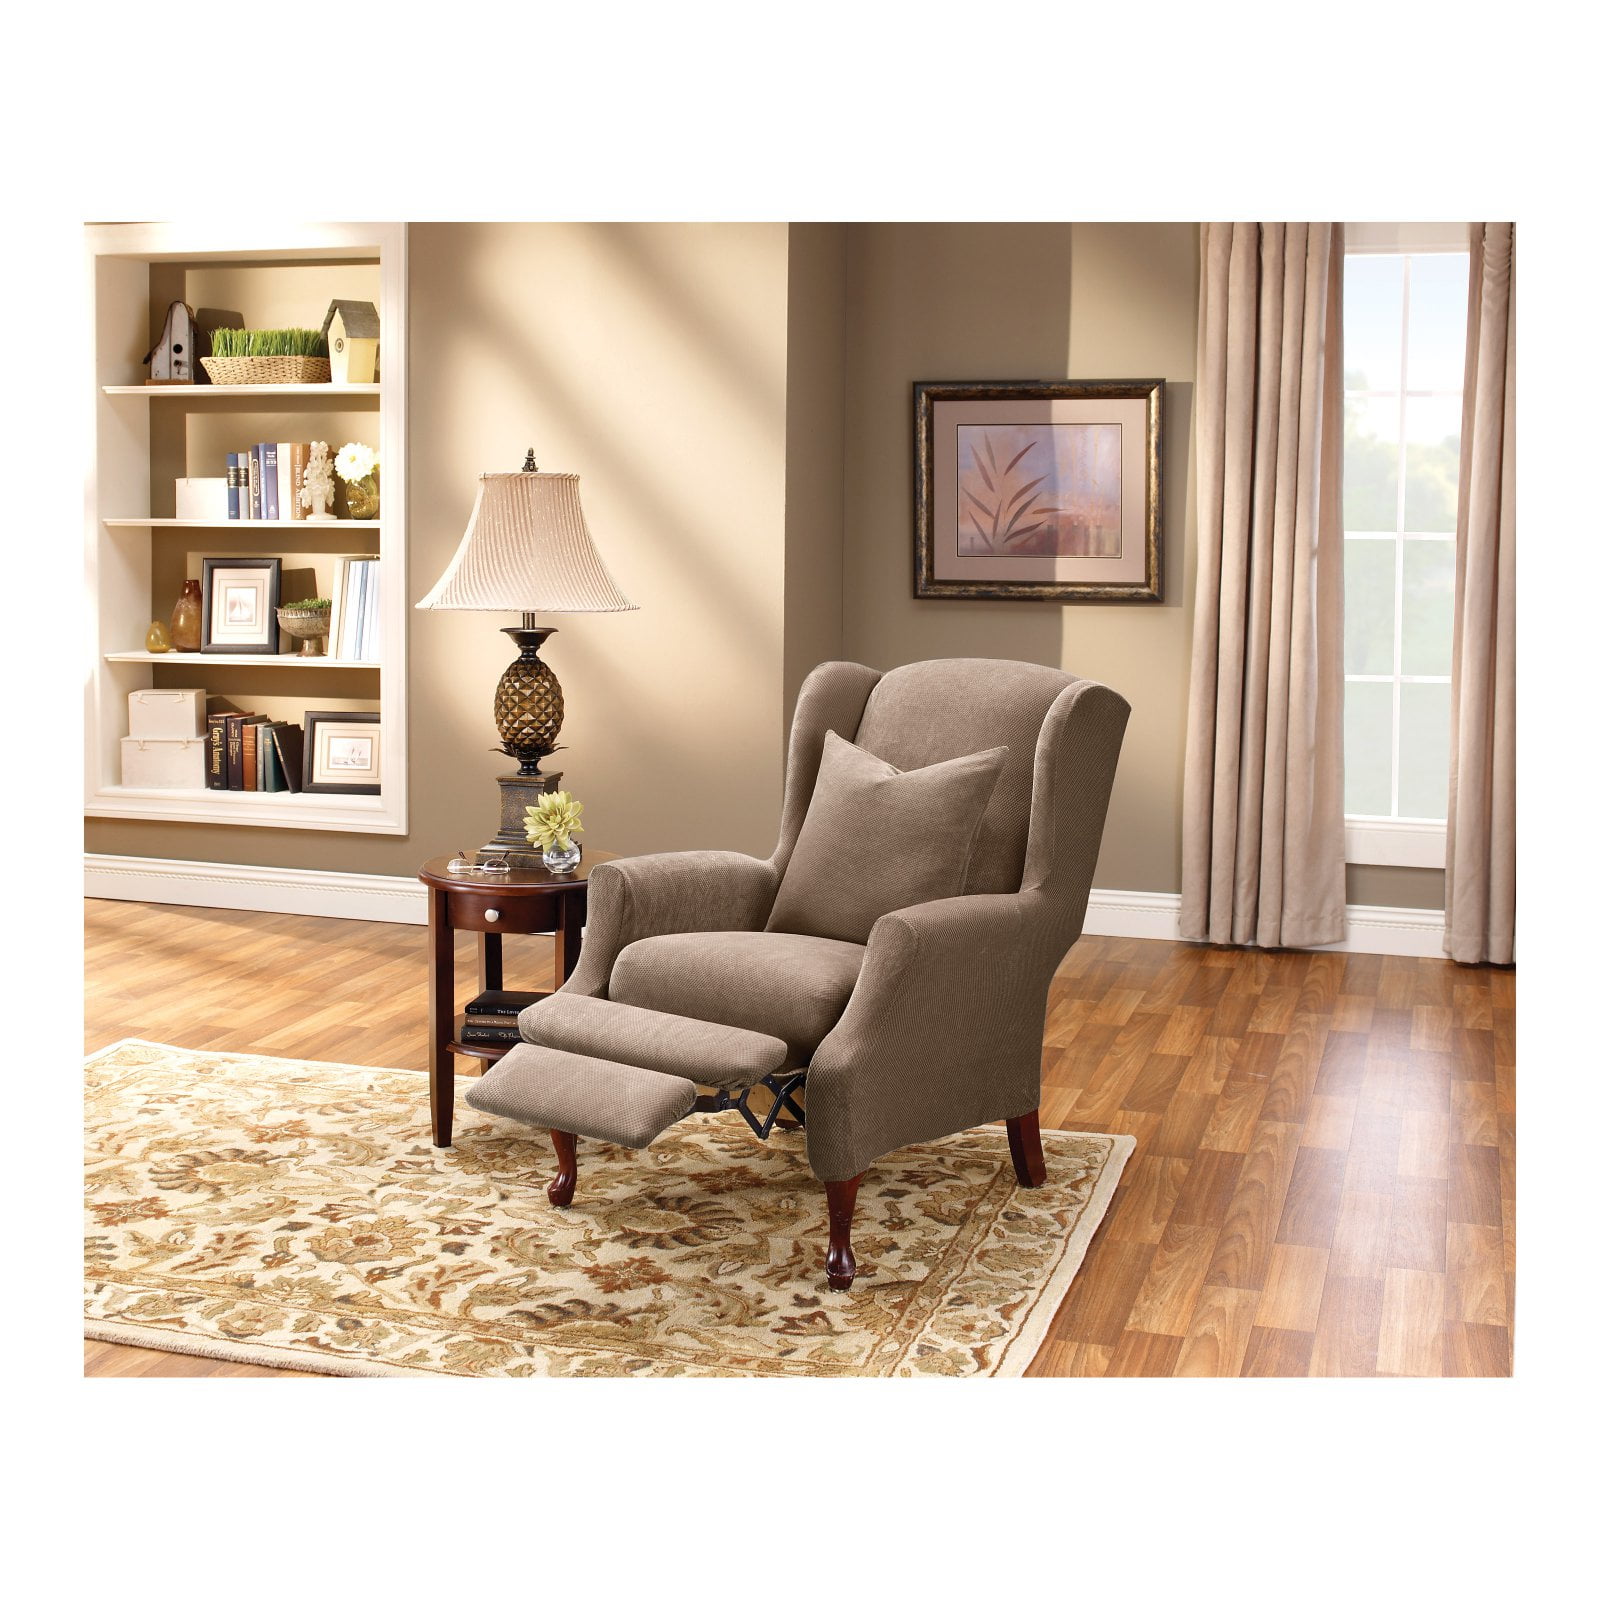 Stretch Pique Recliner Slipcover Taupe - Sure Fit : Target